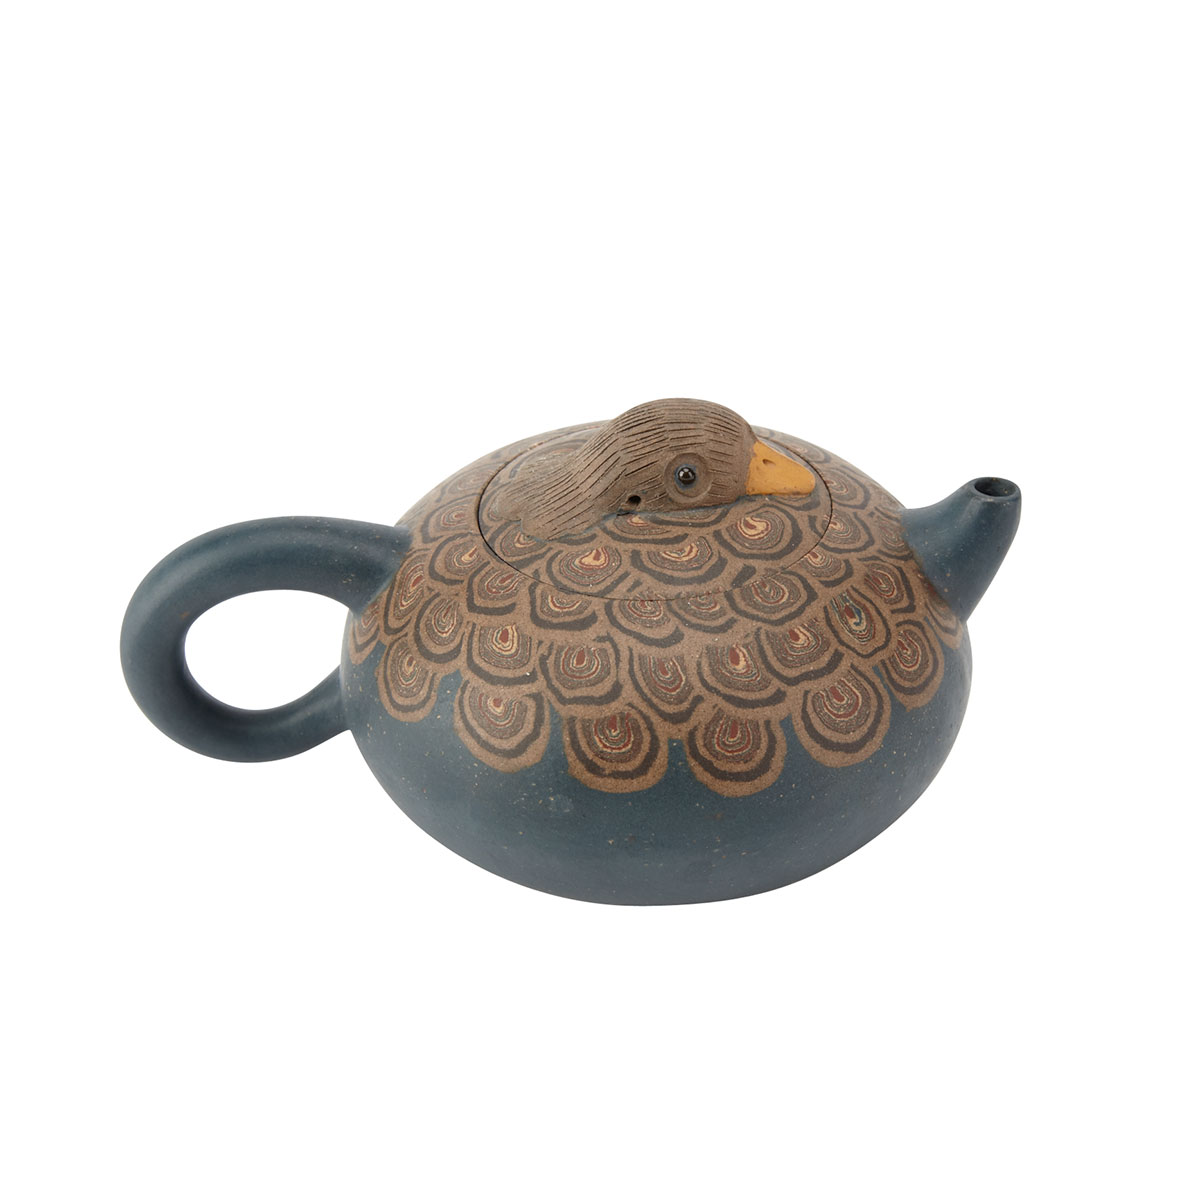 Three Yixing Teapots The first 176c99